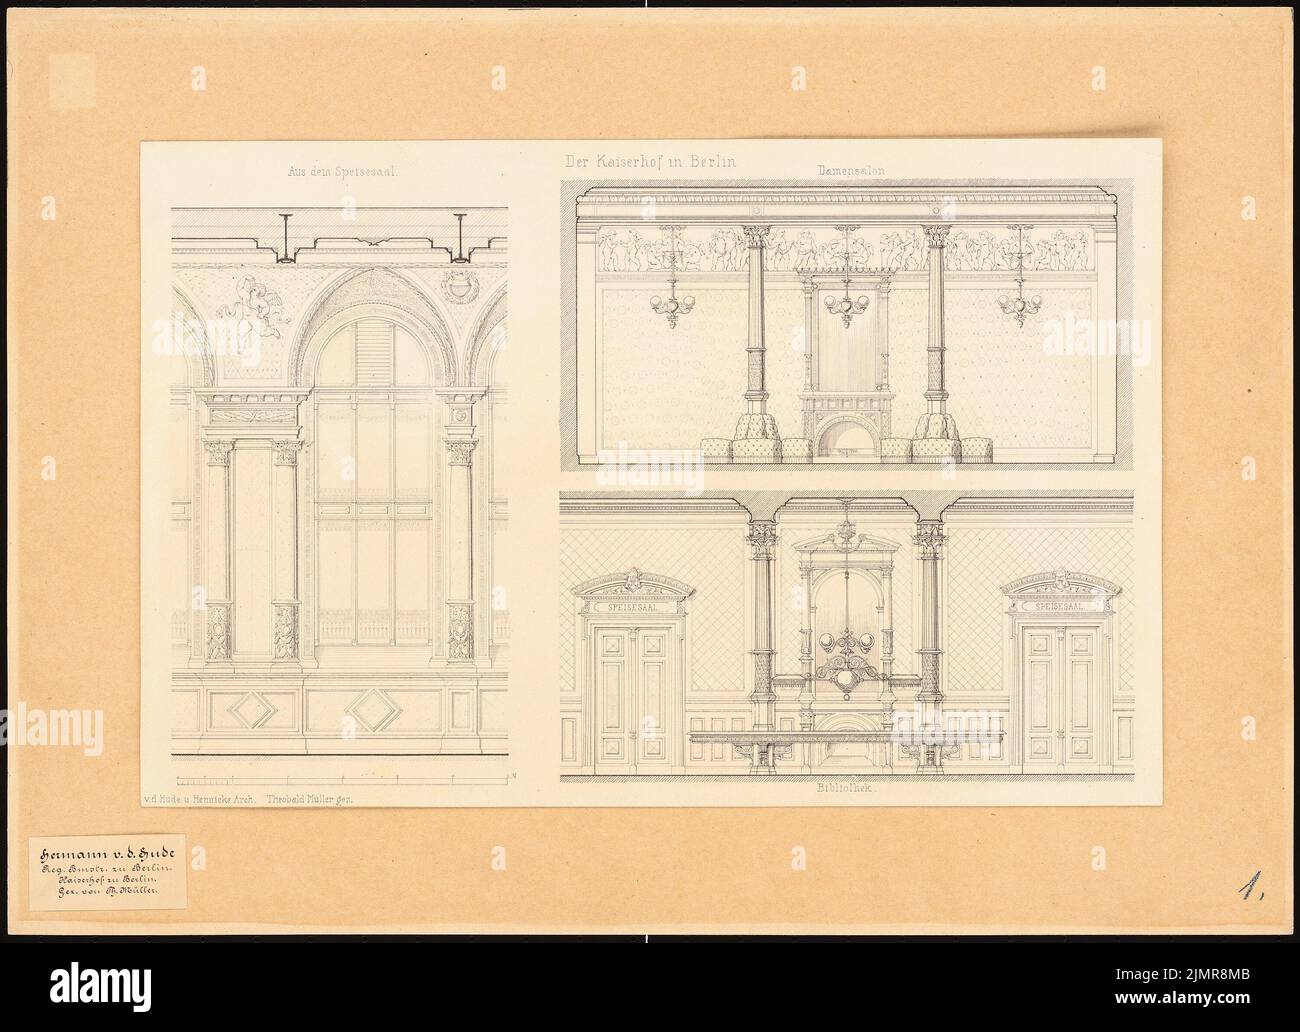 Hude & Hennicke, Hotel Kaiserhof Berlin (without date): Wall designs women's salon, library, dining room. Ink on cardboard, 42.3 x 58.3 cm (including scan edges) Hude & Hennicke : Hotel Kaiserhof Berlin Stock Photo